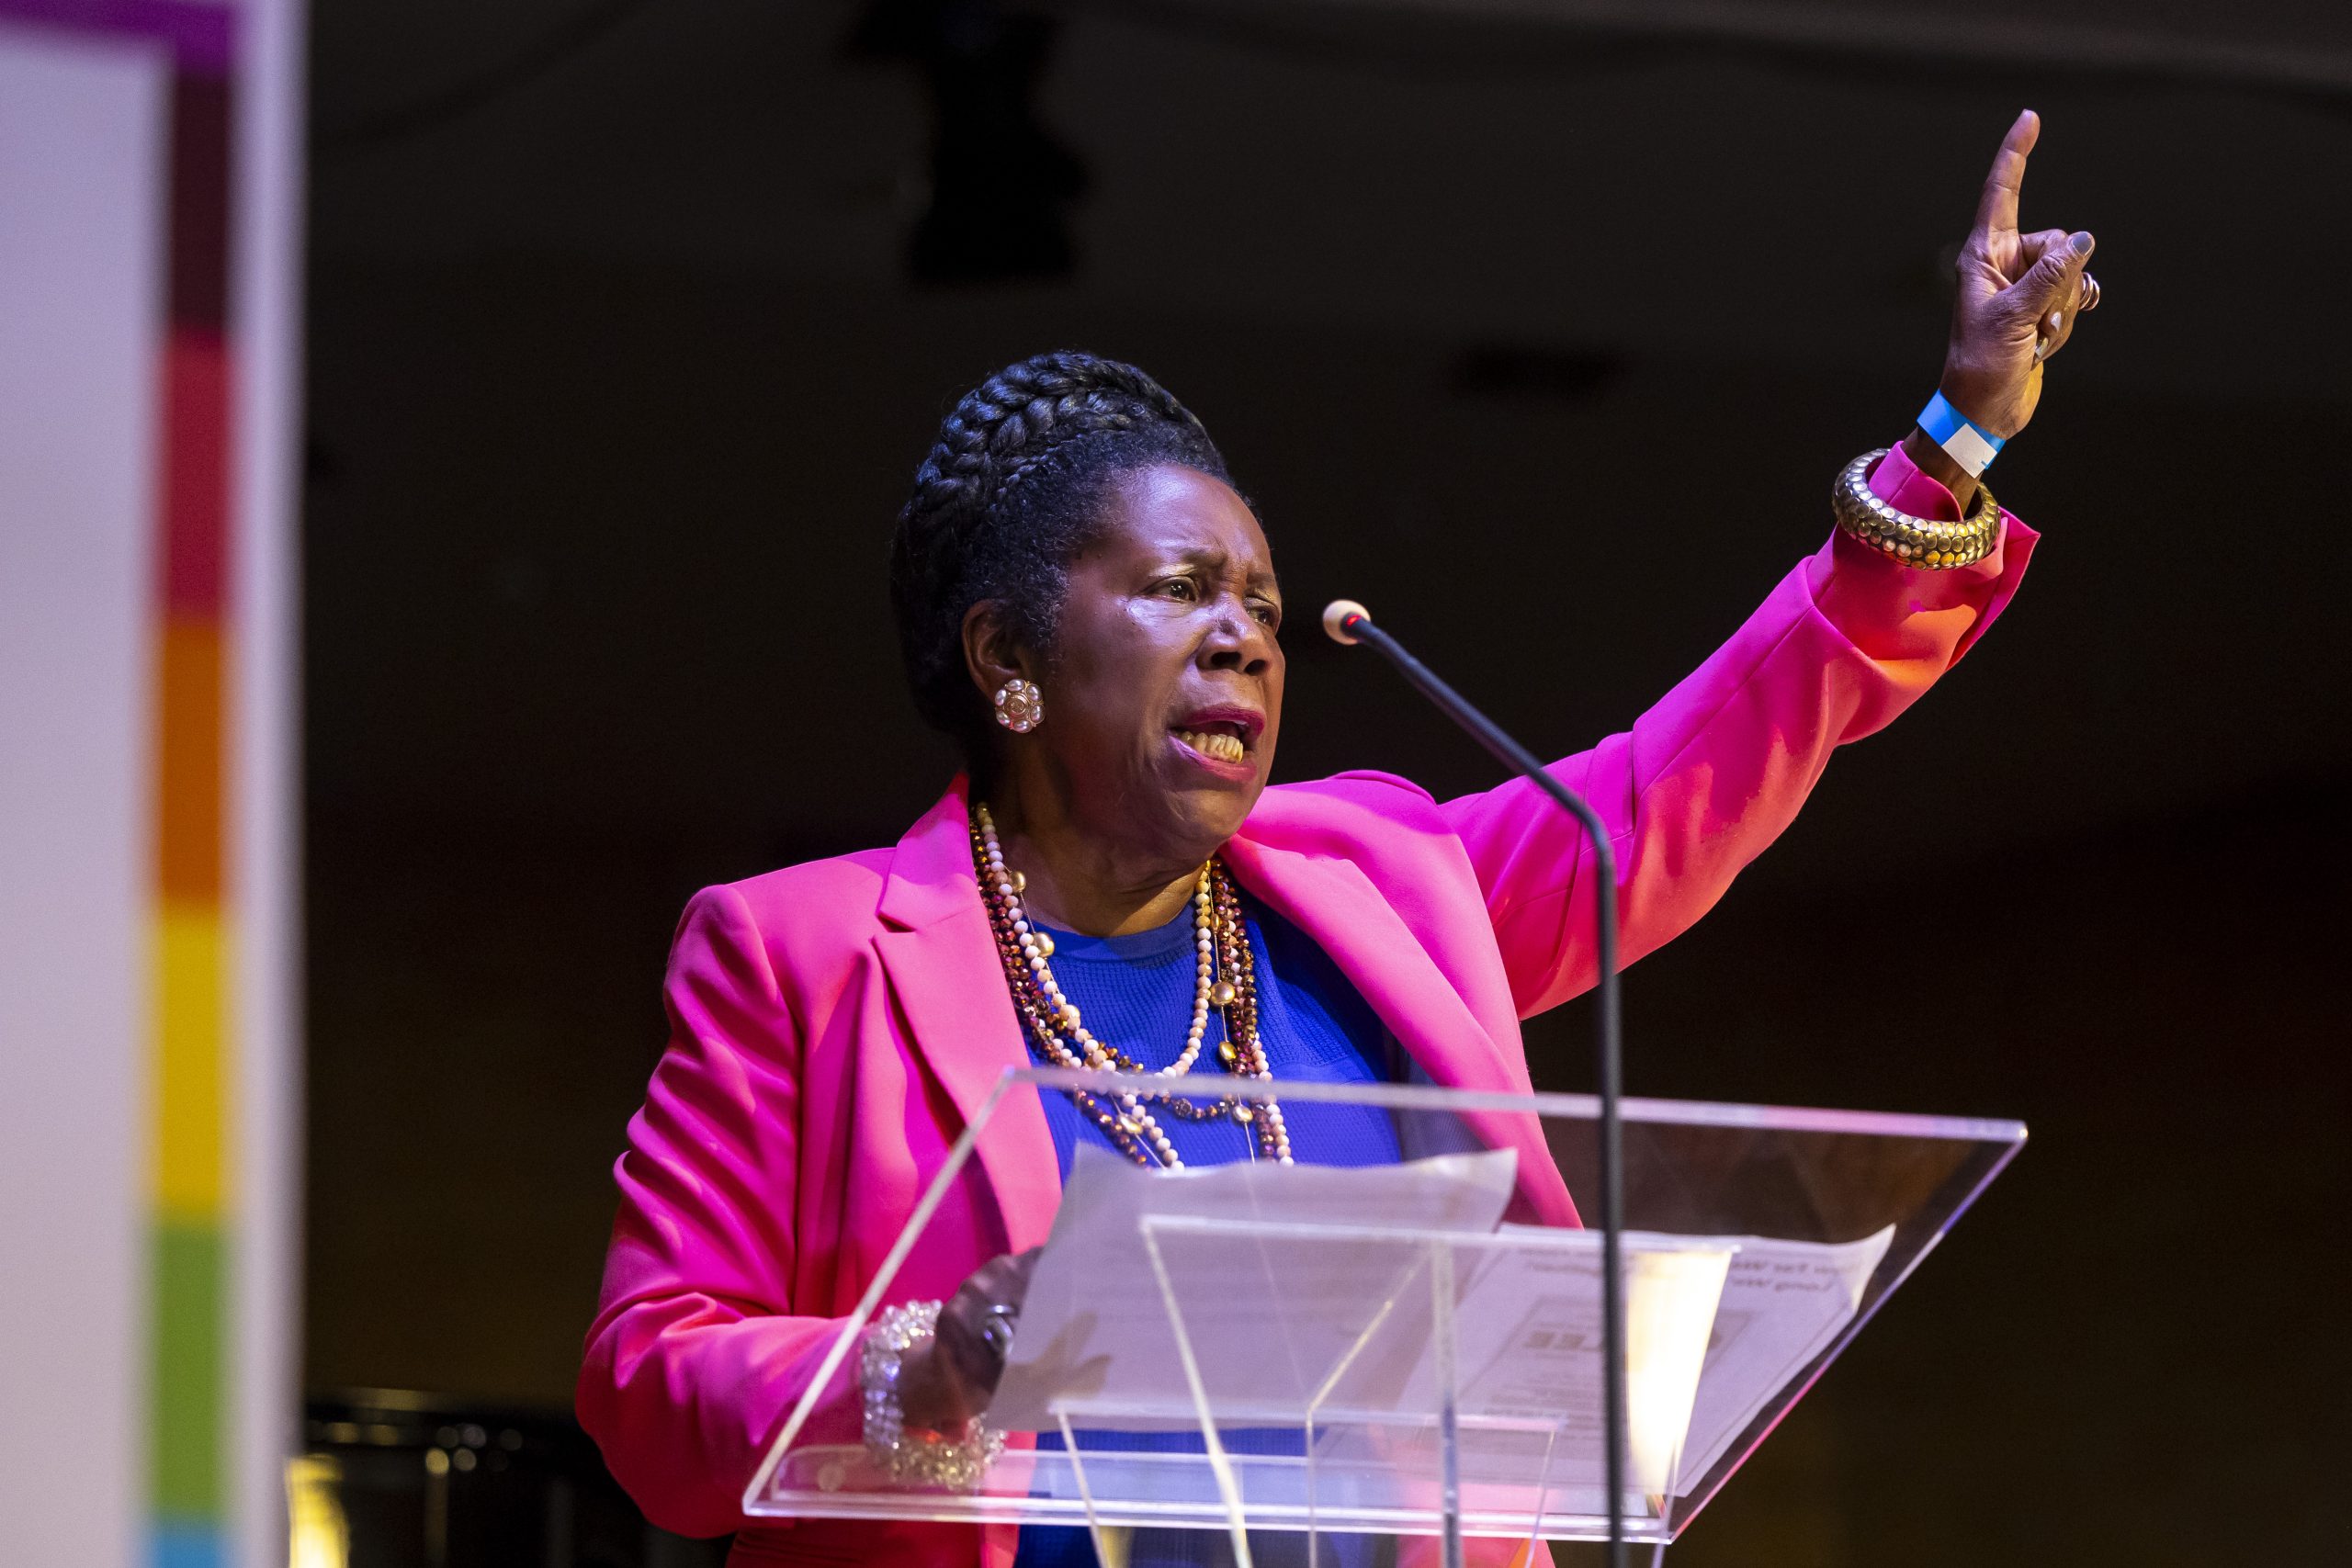 Houston mayoral candidate and U.S. Rep. Sheila Jackson Lee speaks during the LGBTQ+ Political Caucus' endorsement meeting in August.